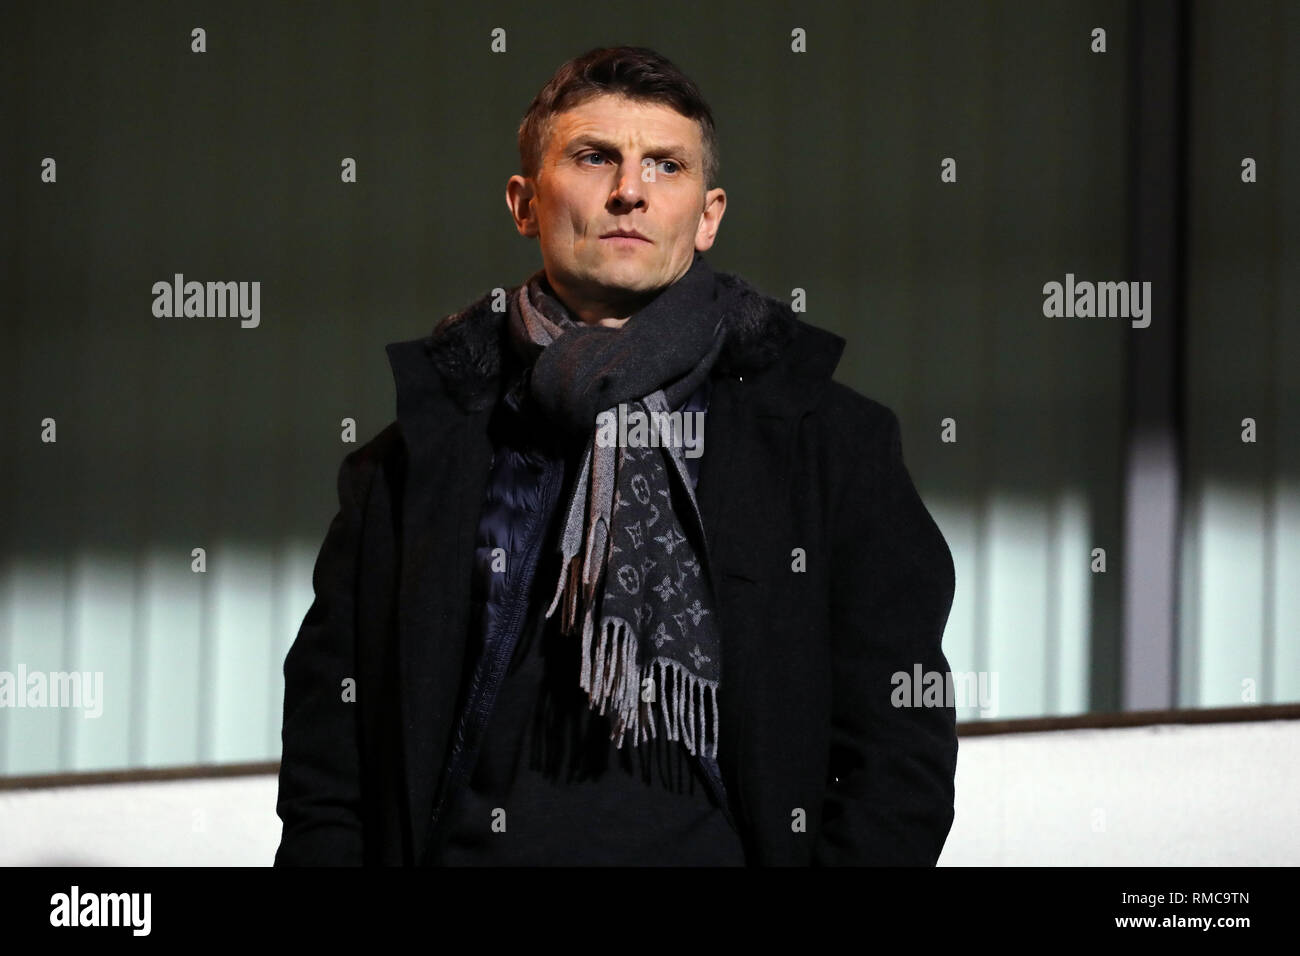 Former Chelsea player, Tore Andre Flo takes in the match - Ipswich Town v Derby County, Sky Bet Championship, Portman Road, Ipswich - 13th February 20 Stock Photo